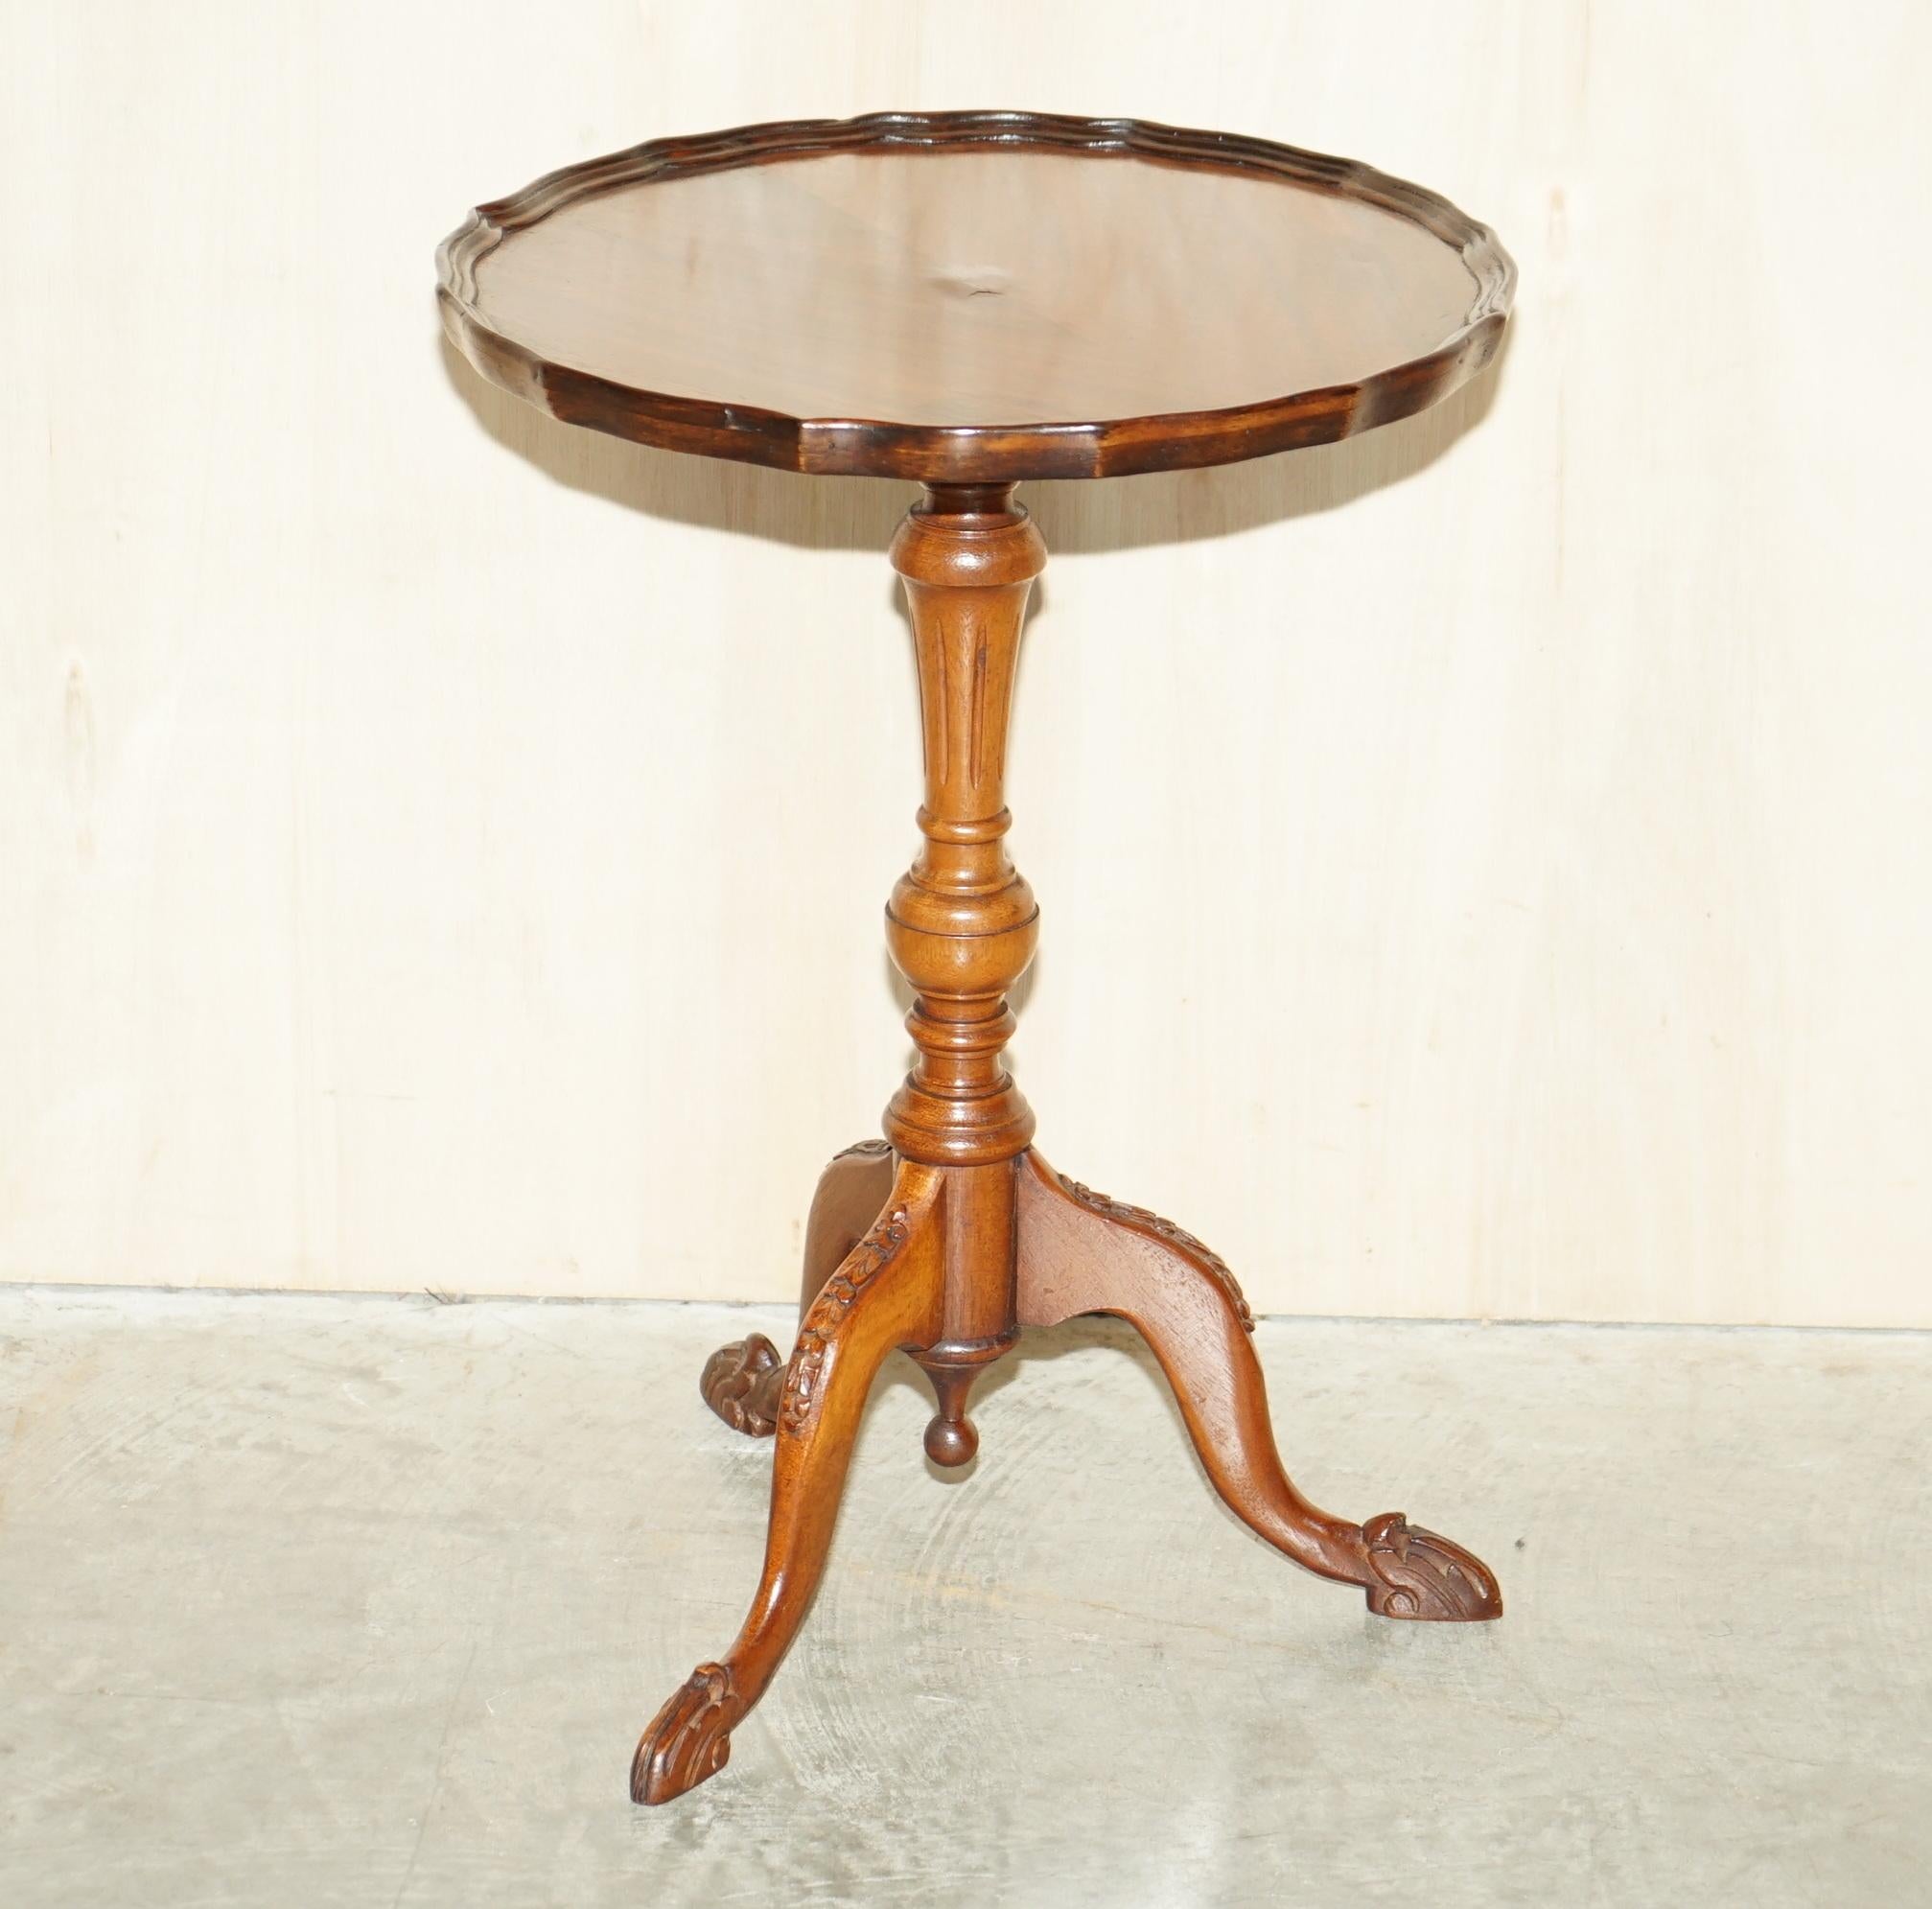 Royal House Antiques

Royal House Antiques is delighted to offer for sale this lovely vintage light Mahogany Pie crust edge lamp or side table.

It has lovely ornately carved legs which are very decorative 

A good-looking well-made tripod table in